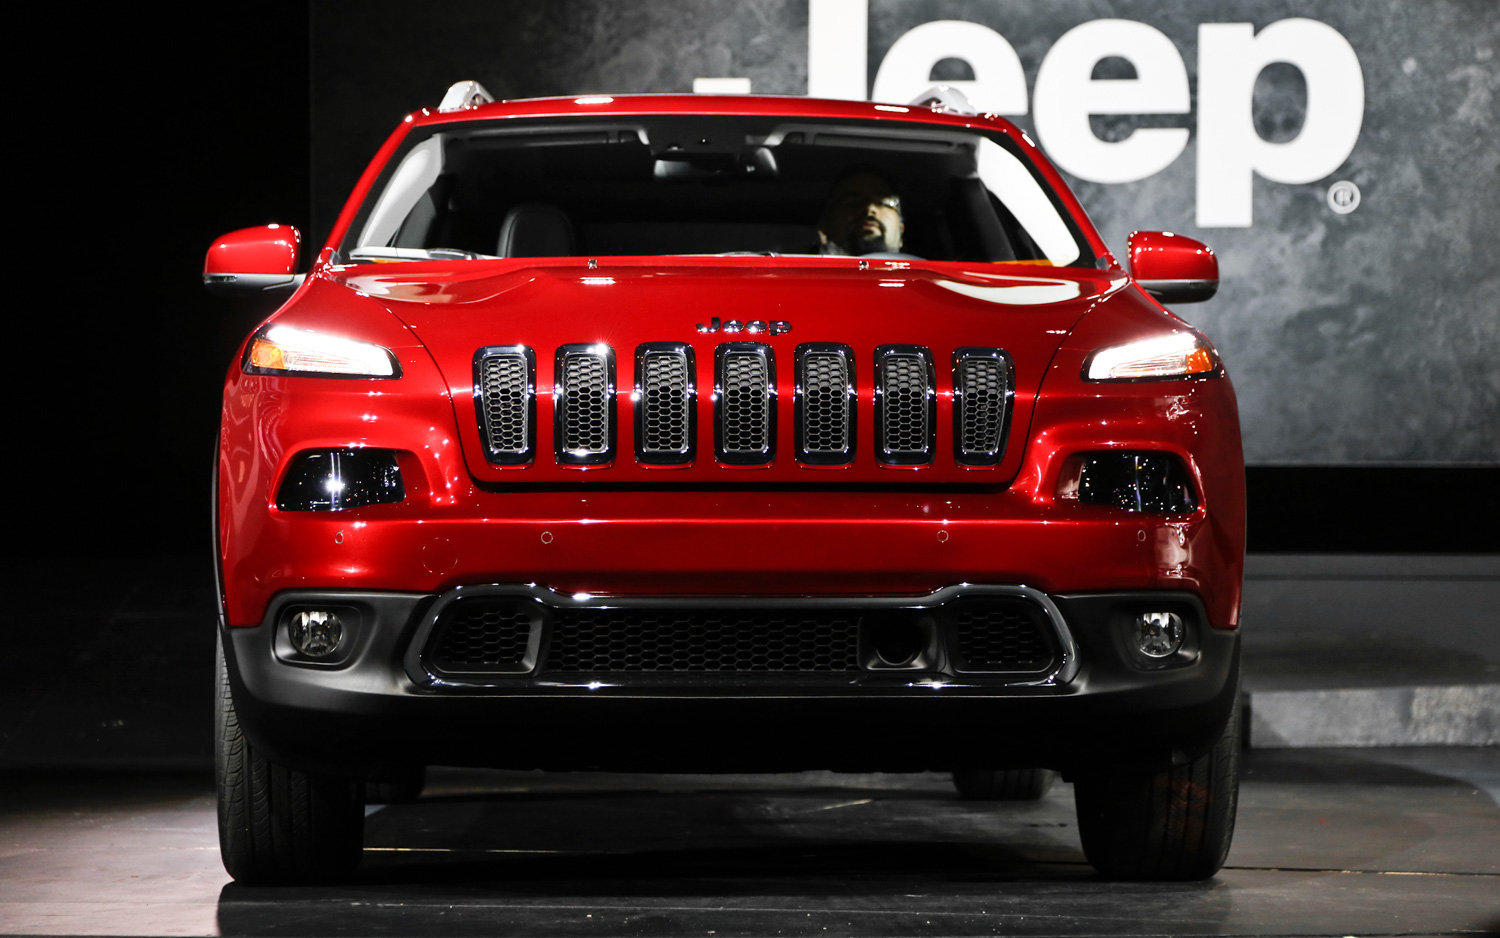 http://www.chukyo-chrysler.co.jp/up_img/2014-Jeep-Cherokee-Limited-front-end.jpg